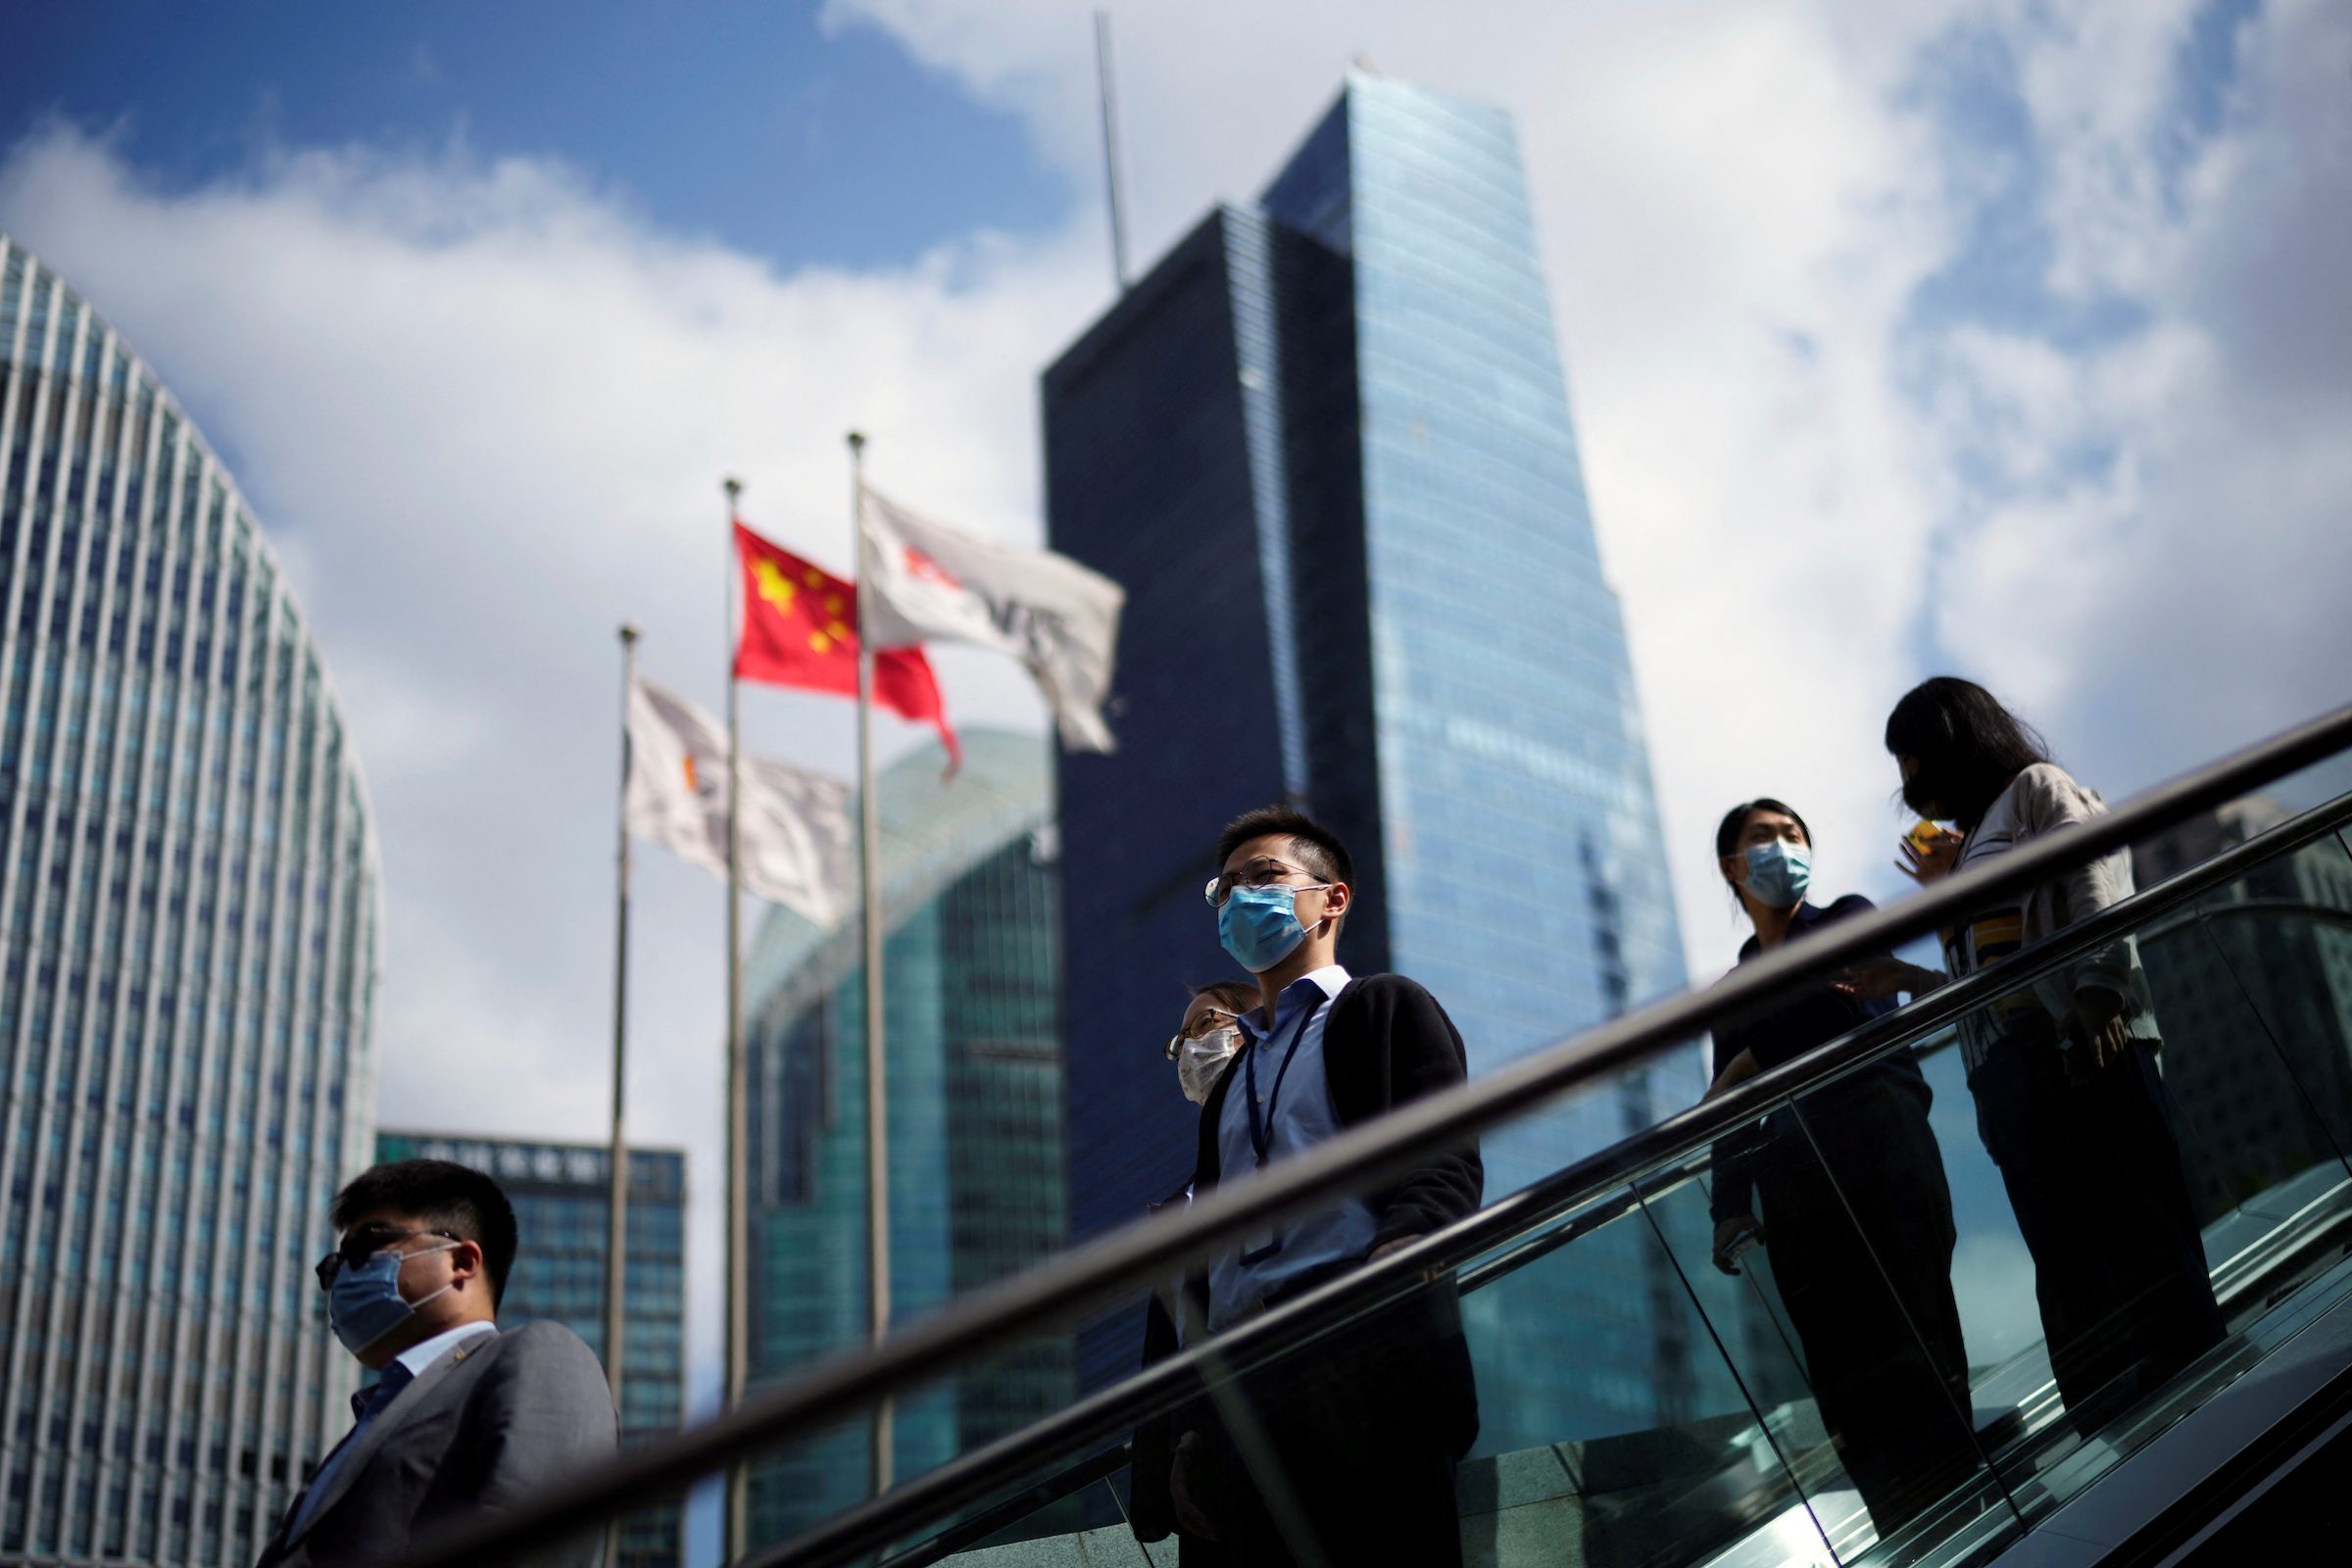 China showed ‘significant’ Q3 rebound but faces challenges – state planner